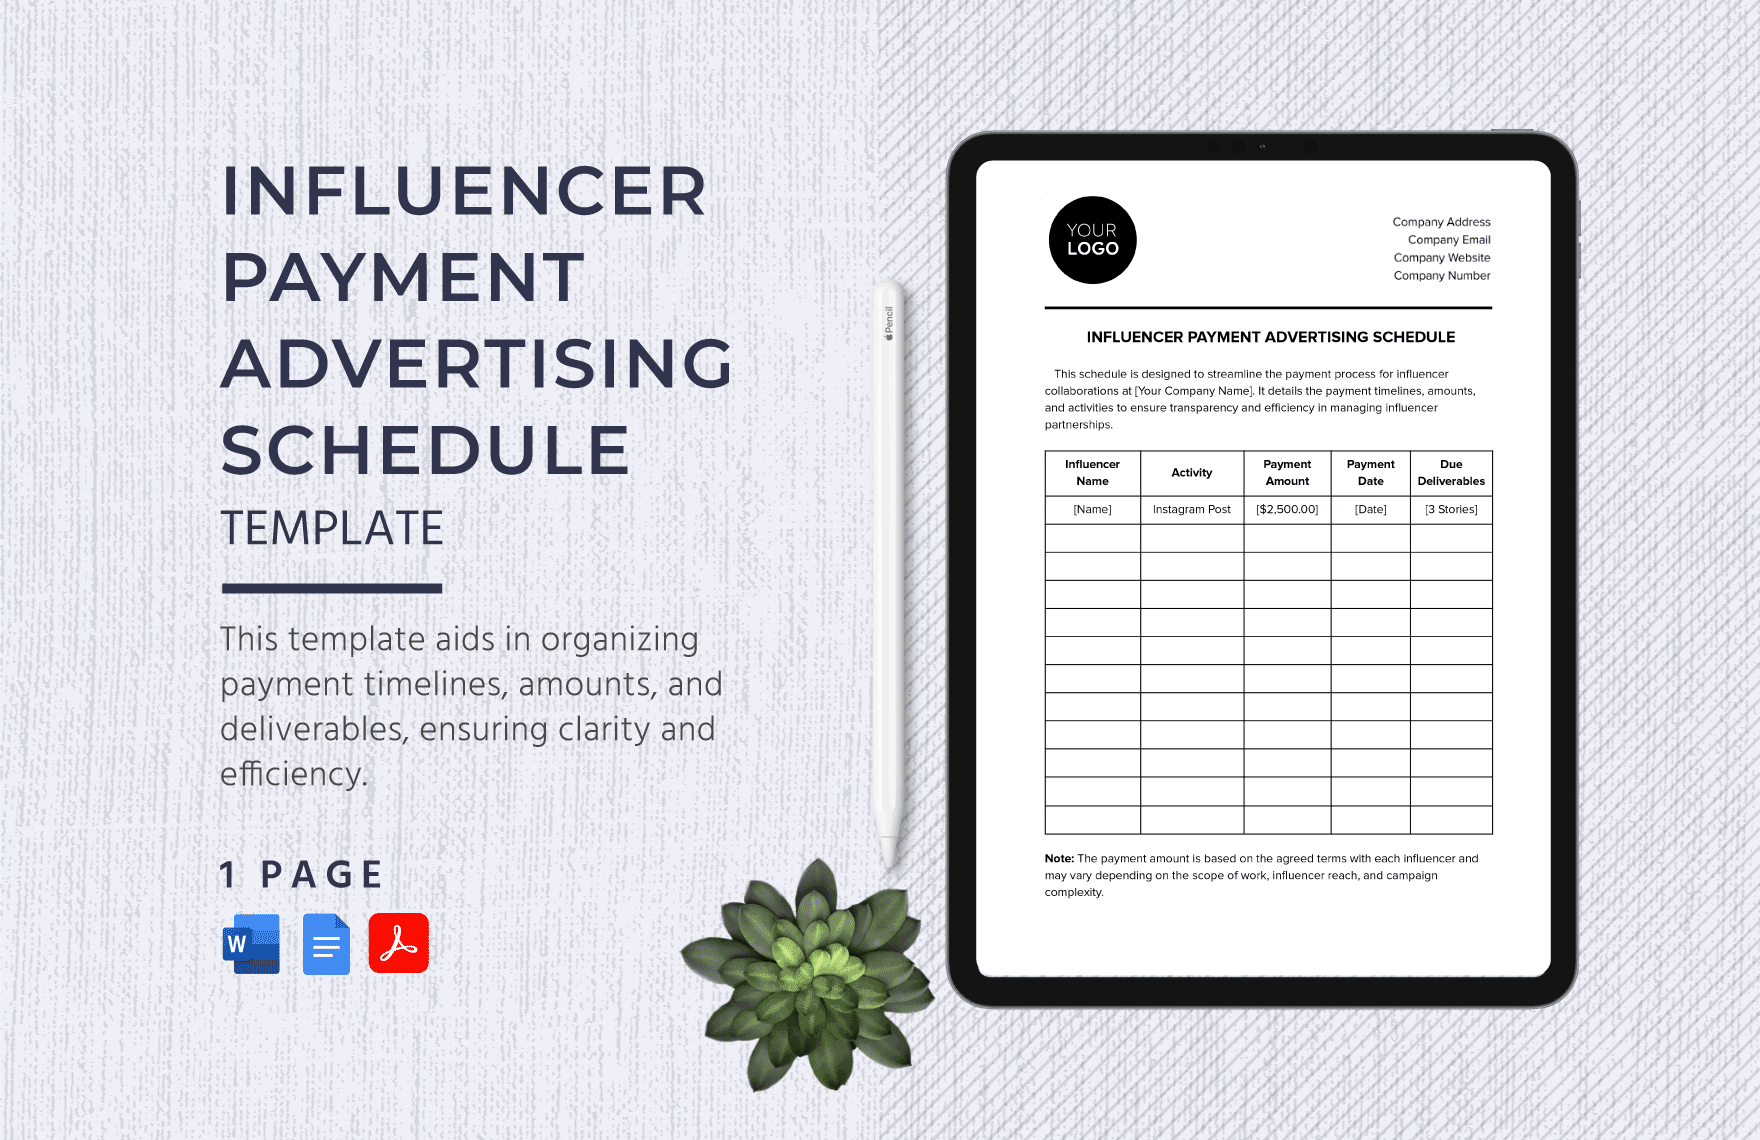 Influencer Payment Advertising Schedule Template